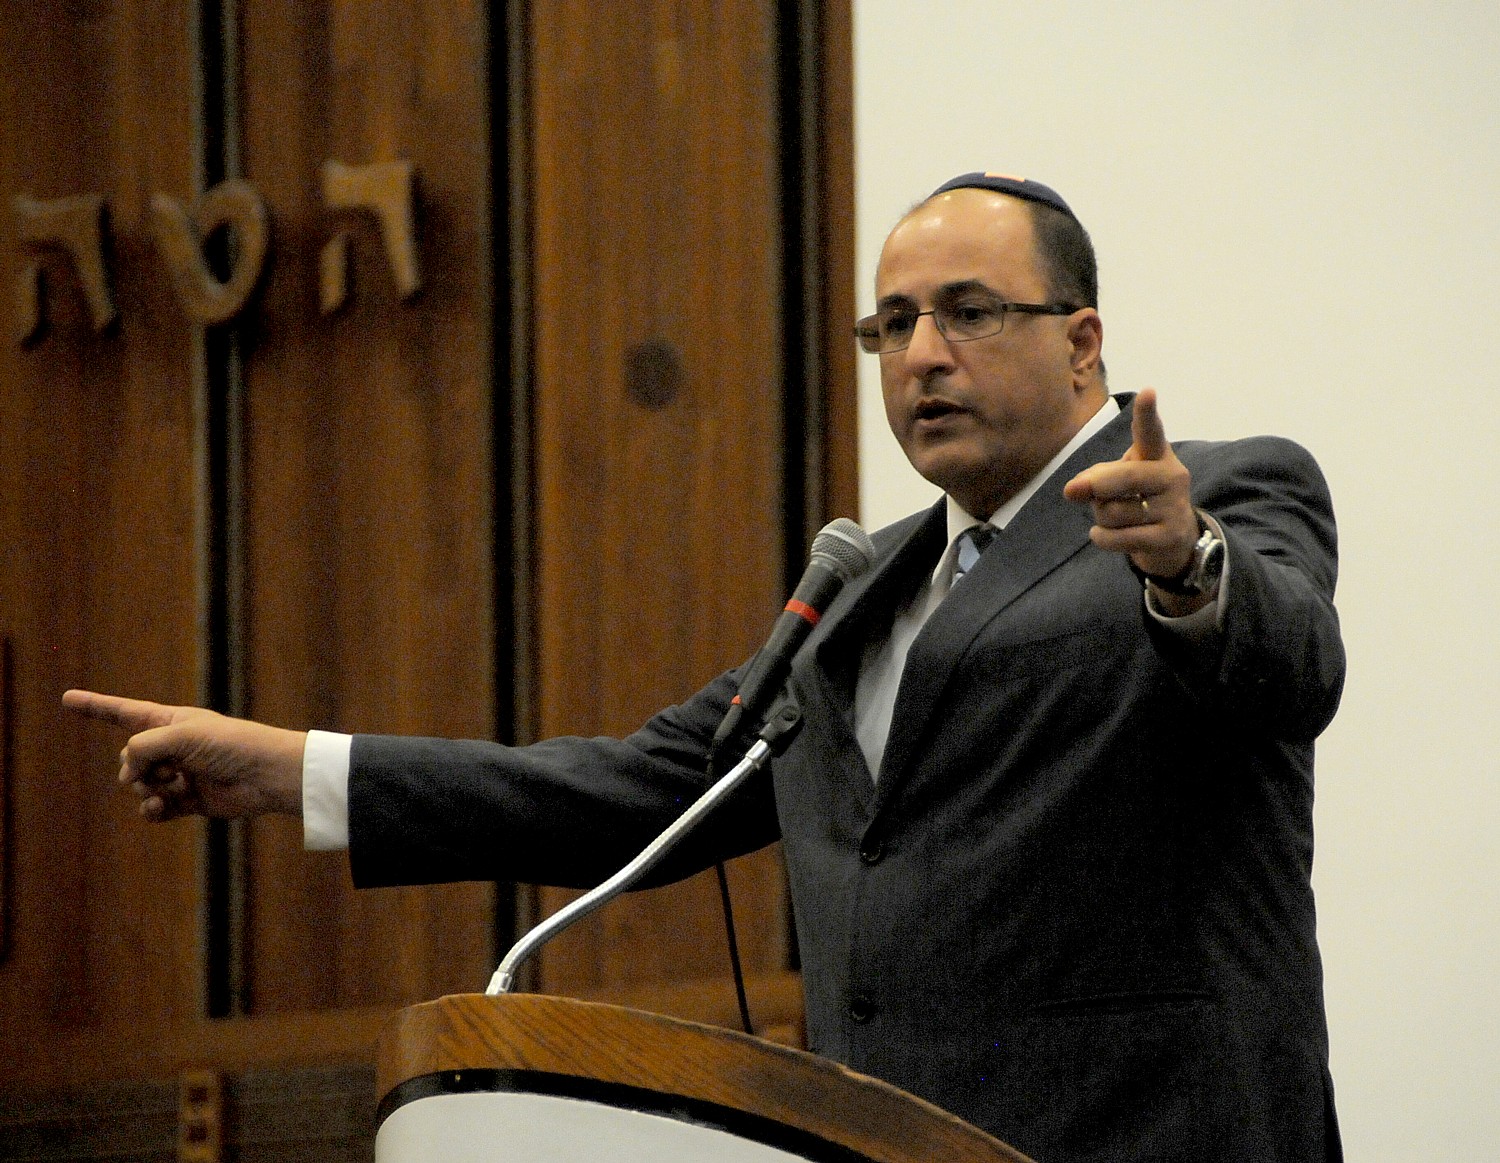 Ambassador Ido Aharoni of Israel at Great Neck Synagogue: "The root cause for instability in the Middle East has nothing to do with Israel-Palestinians." © 2015 Karen Rubin/news-photos-features.com